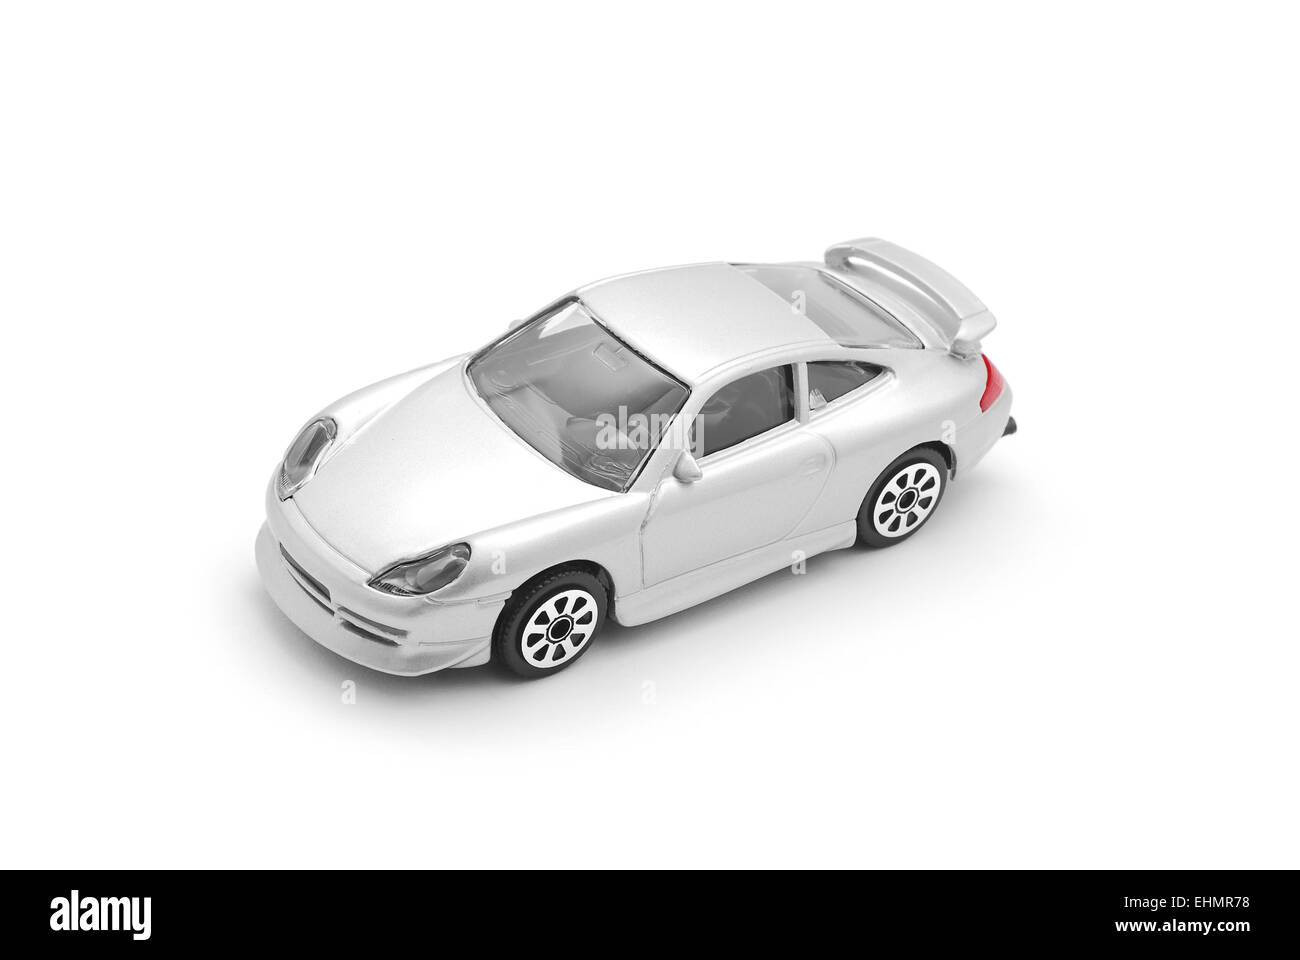 Toy sport car on white Banque D'Images